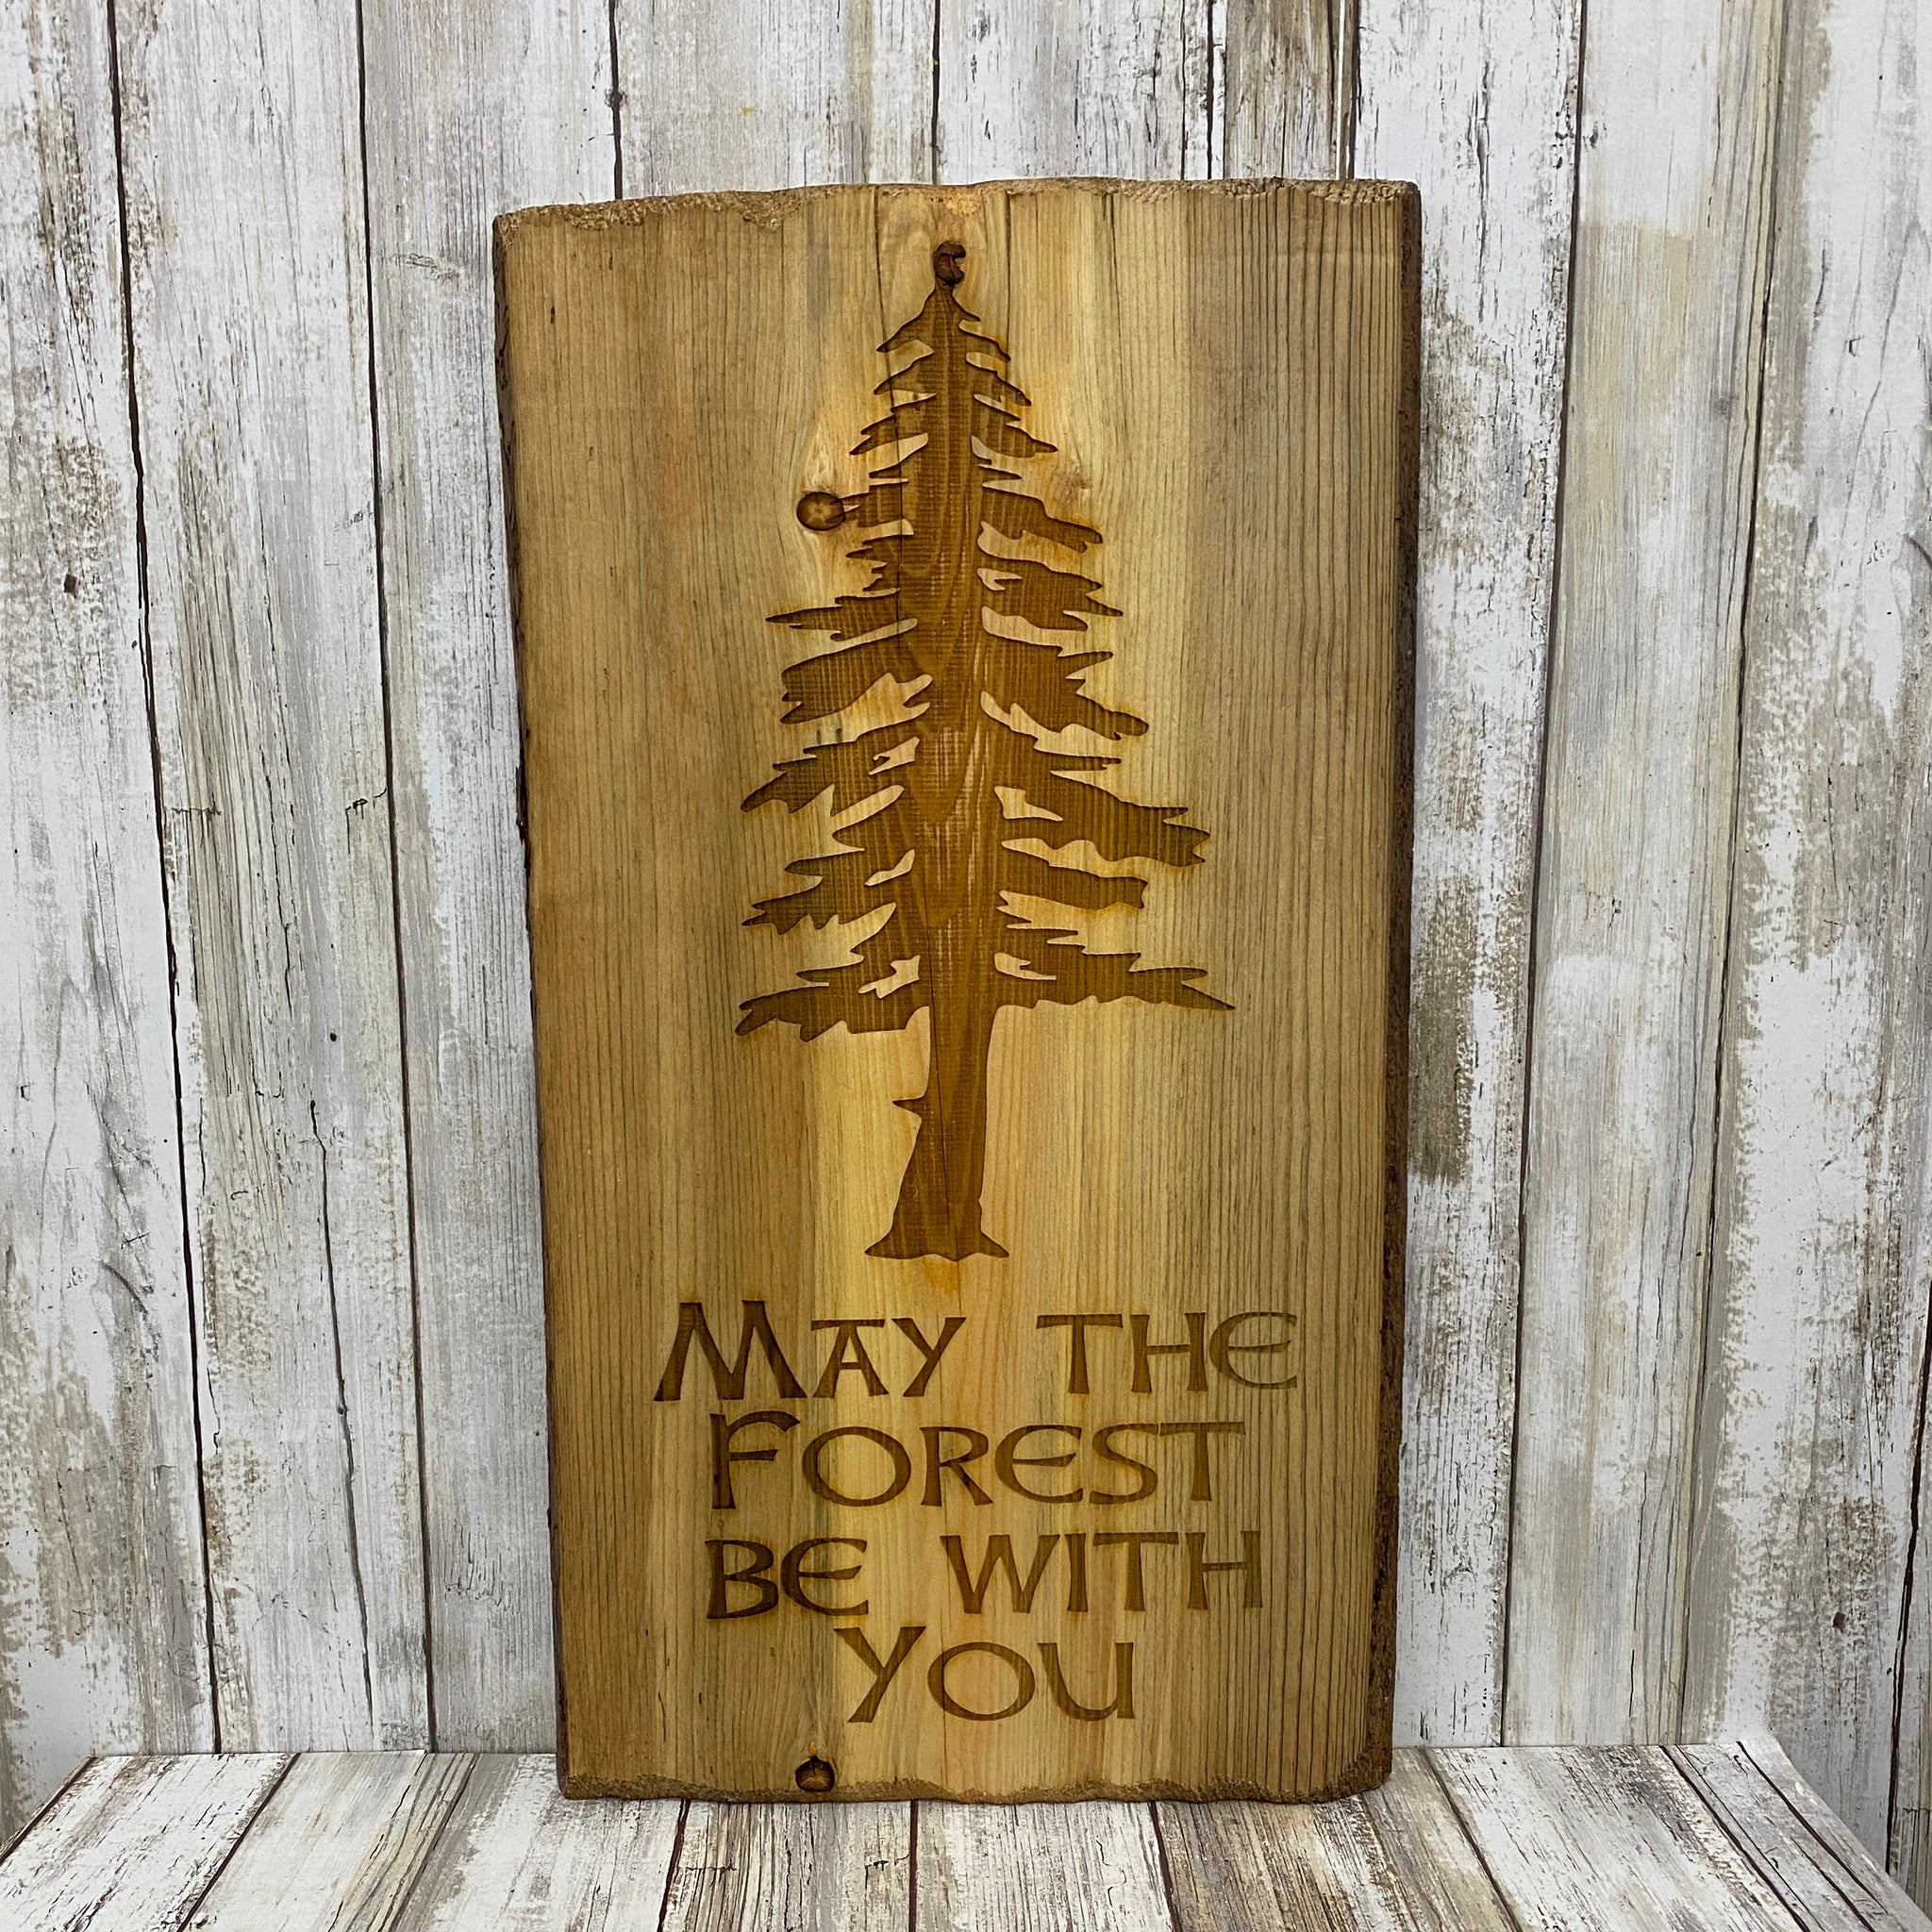 May the Forest Be With You Pine Tree Wood Sign - Cabin Decor - Laser Engraved Reclaimed Pine Tree Wood